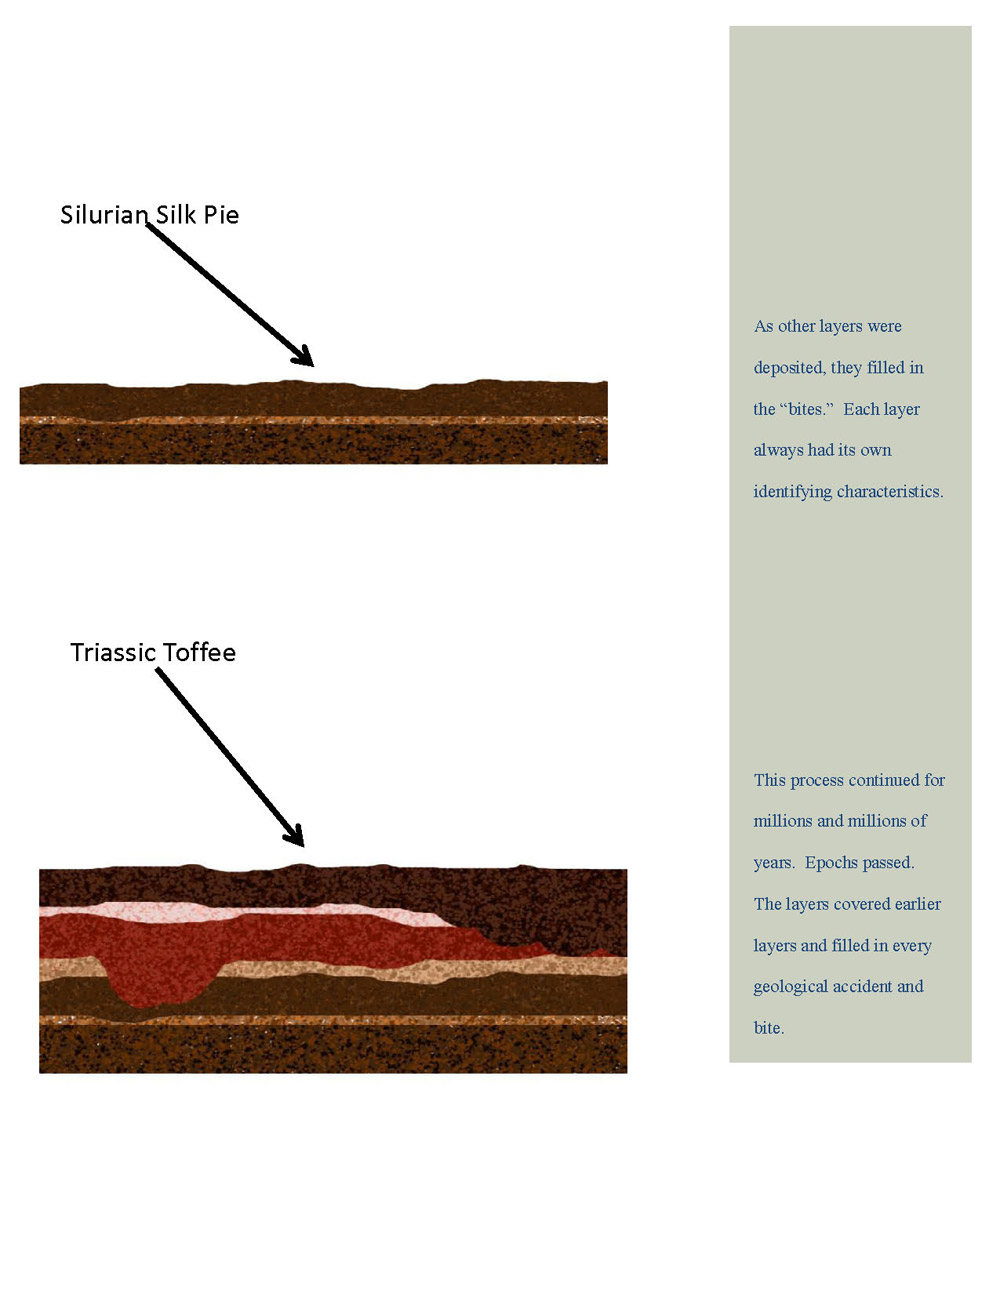 These images show us how formations were deposited. It wasn’t always an even process. Sometimes a geologic “accident” such as a shift in the earth’s crust, might create a “bite” or depression that would be filled in by other layers of sediment. By knowing the composition of each layer, geologists can determine which layer settled to a lower point.